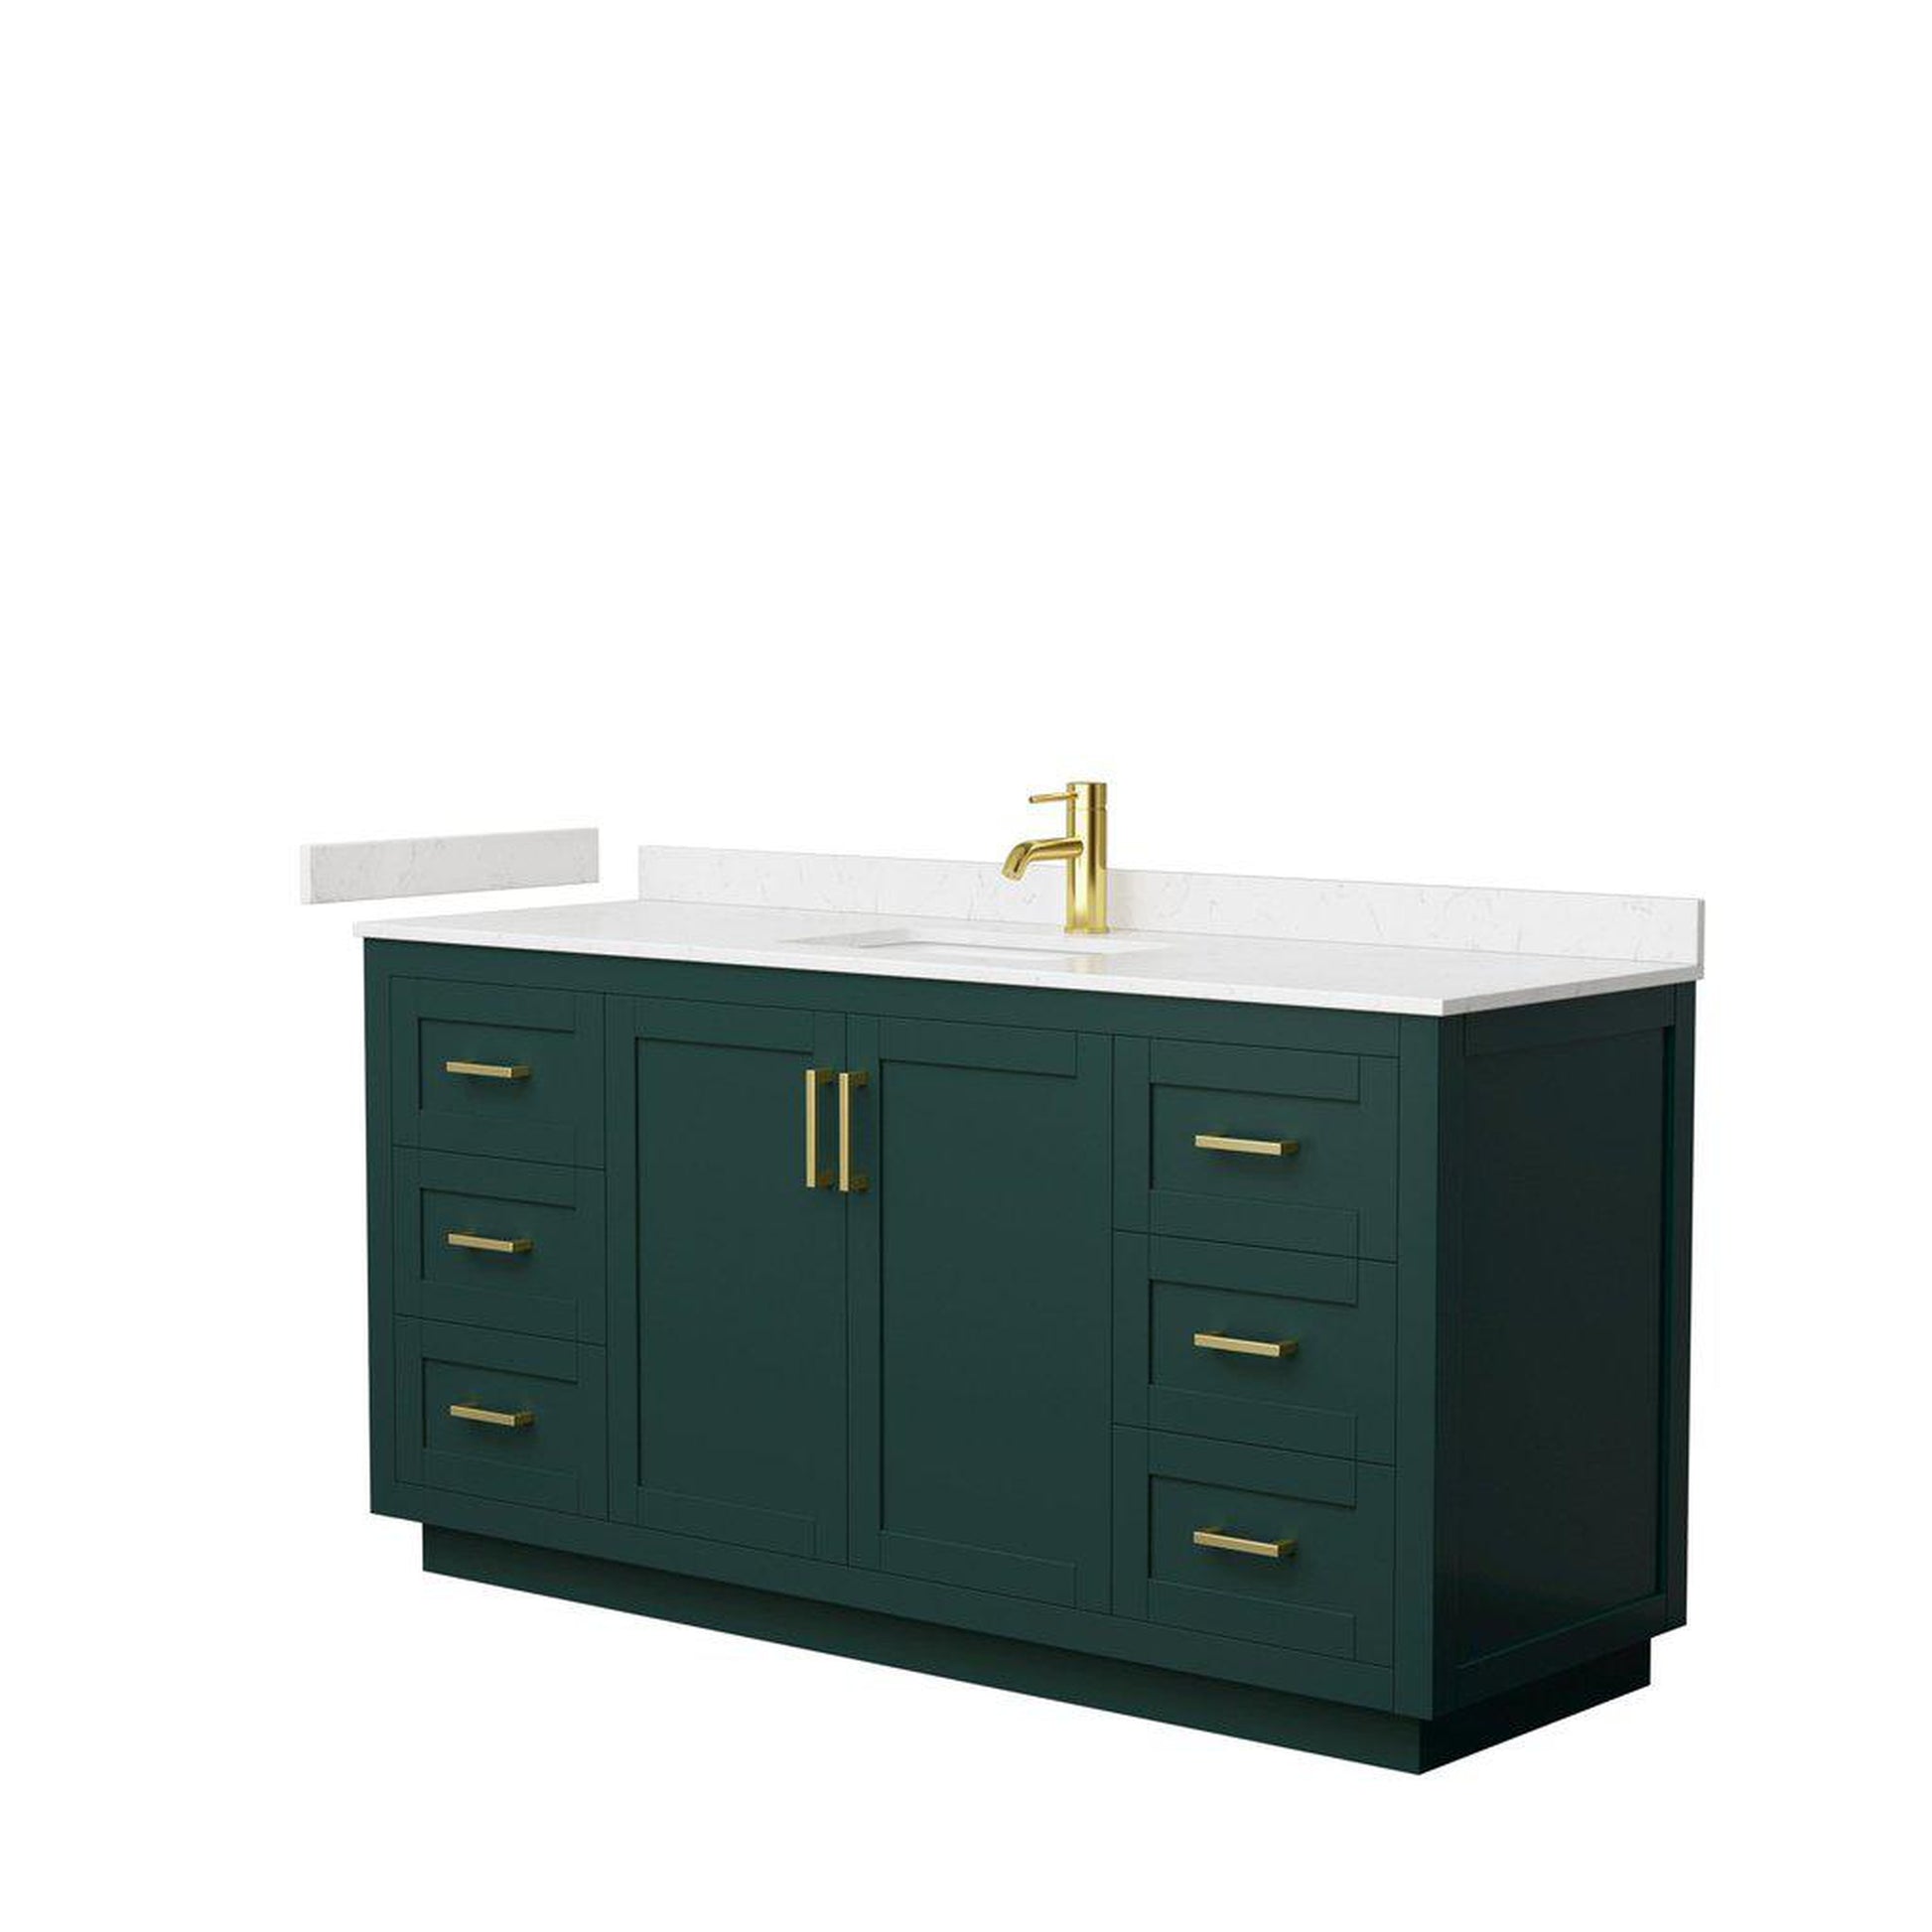 Wyndham Collection Miranda 66" Single Bathroom Green Vanity Set With Light-Vein Carrara Cultured Marble Countertop, Undermount Square Sink, And Brushed Gold Trim